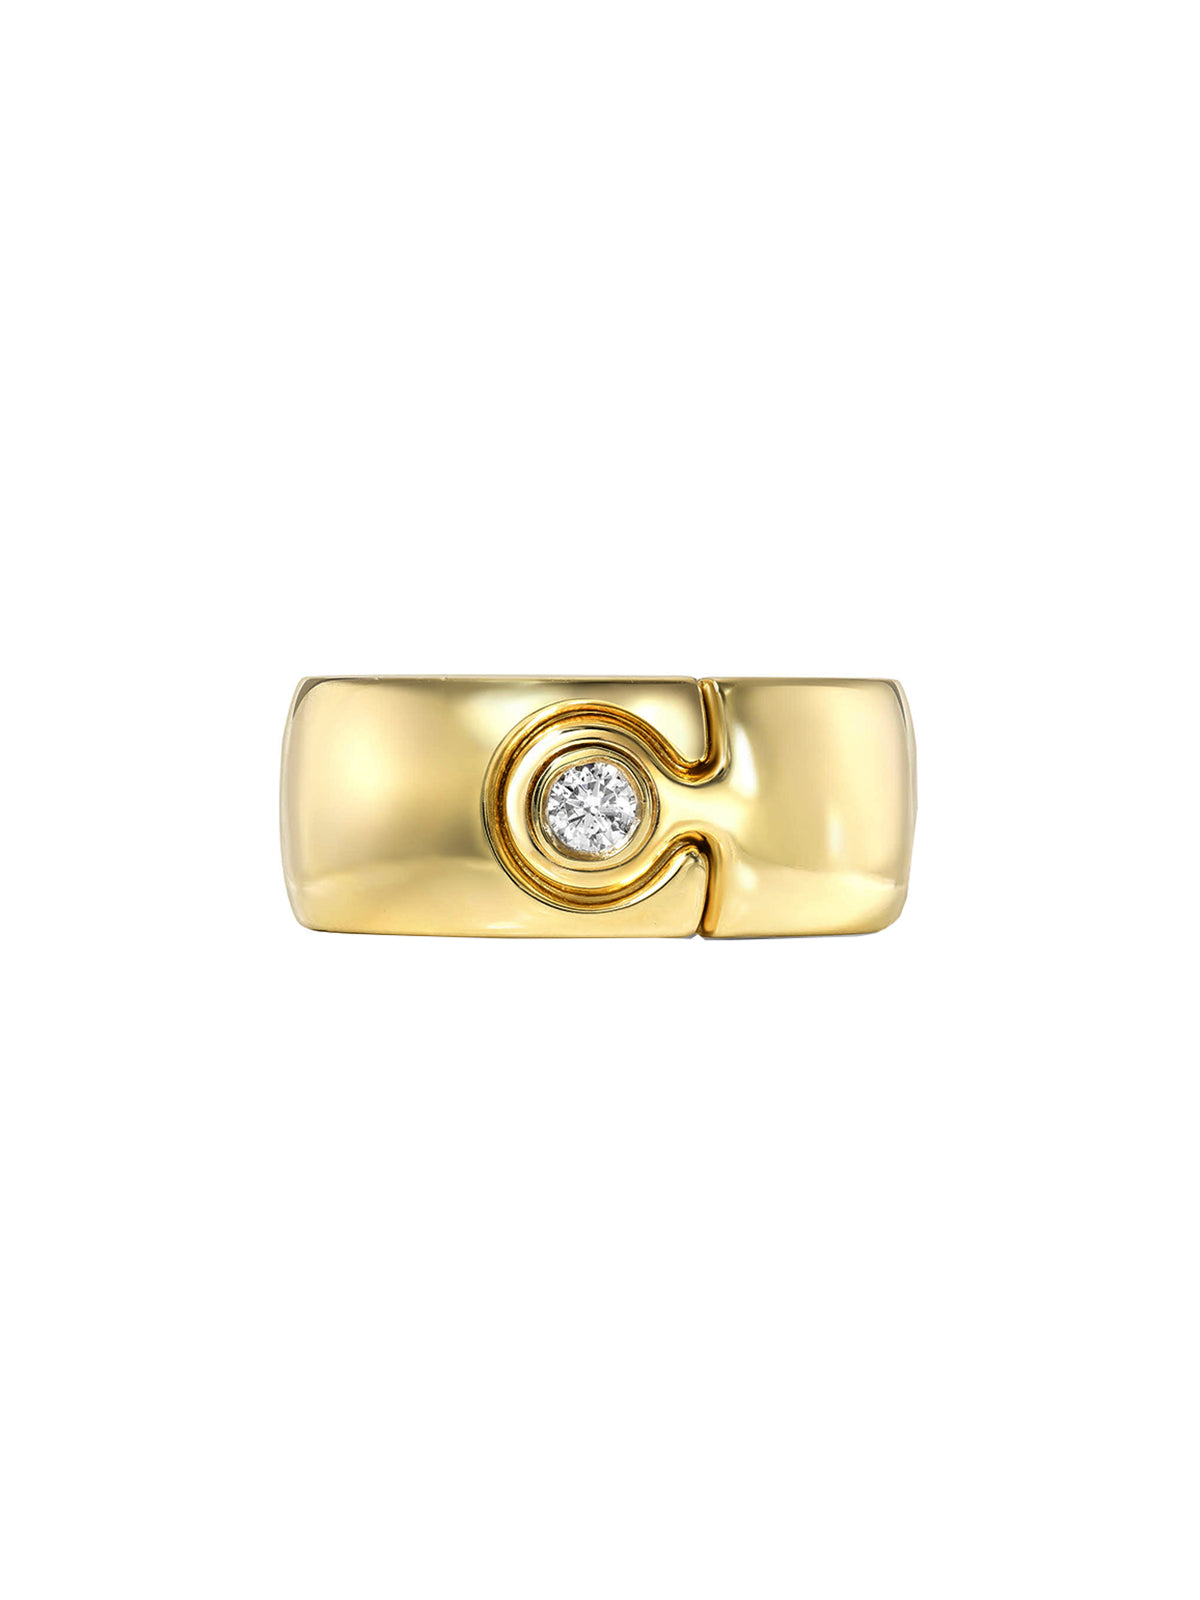 Photos - Ring Small Impetus Puzzle Yellow Gold , 5